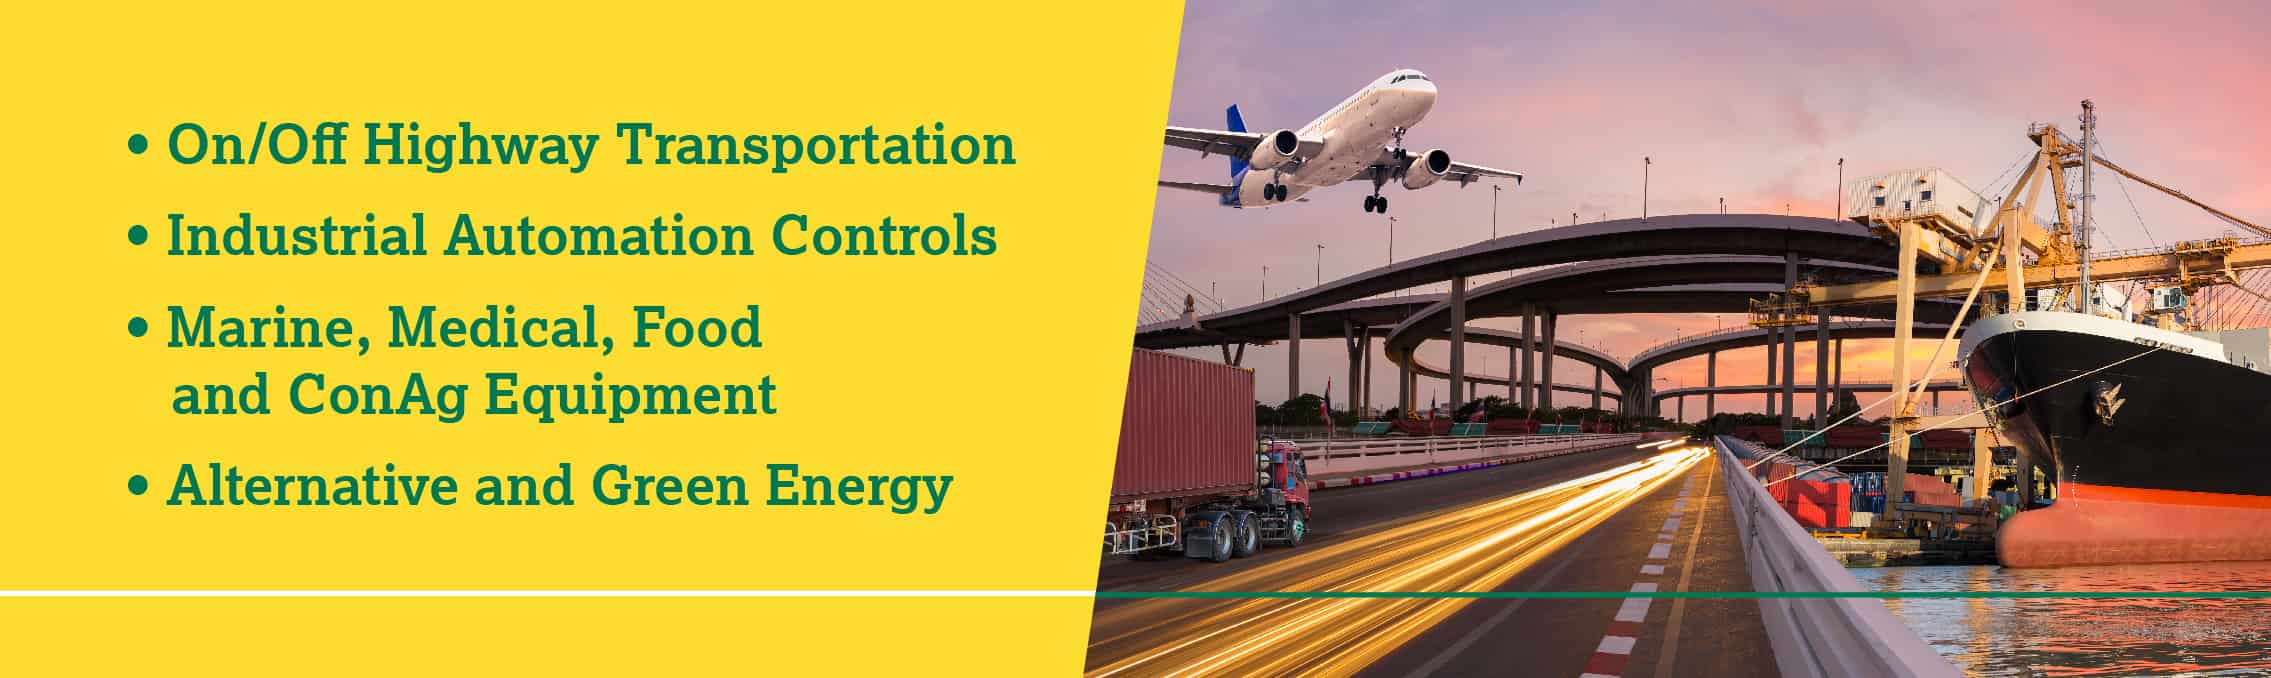 On/Off Highway Transportation, Industrial Automation Controls, Marine, Medical, Food and ConAg Equipment, Alternative and Green Energy